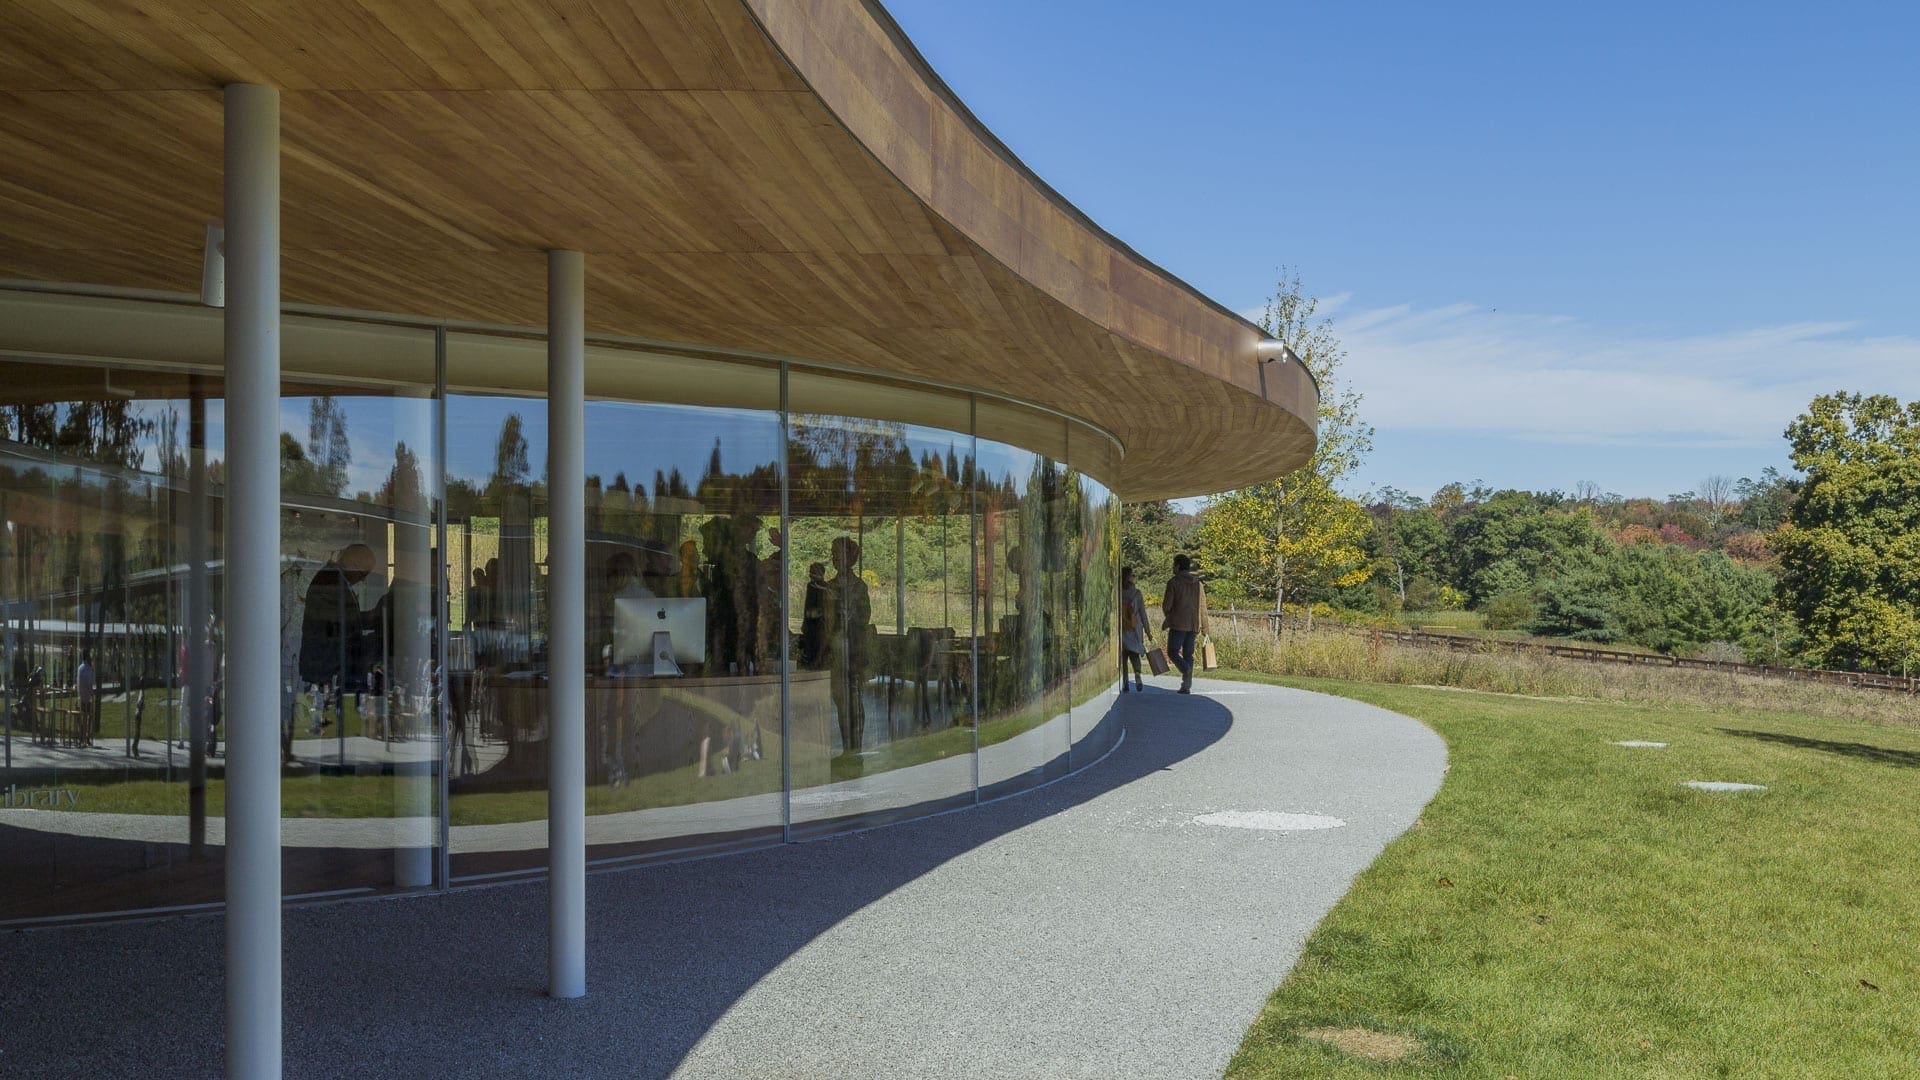 The building's wooden soffit provides a contrast to its reflective aluminum roof.